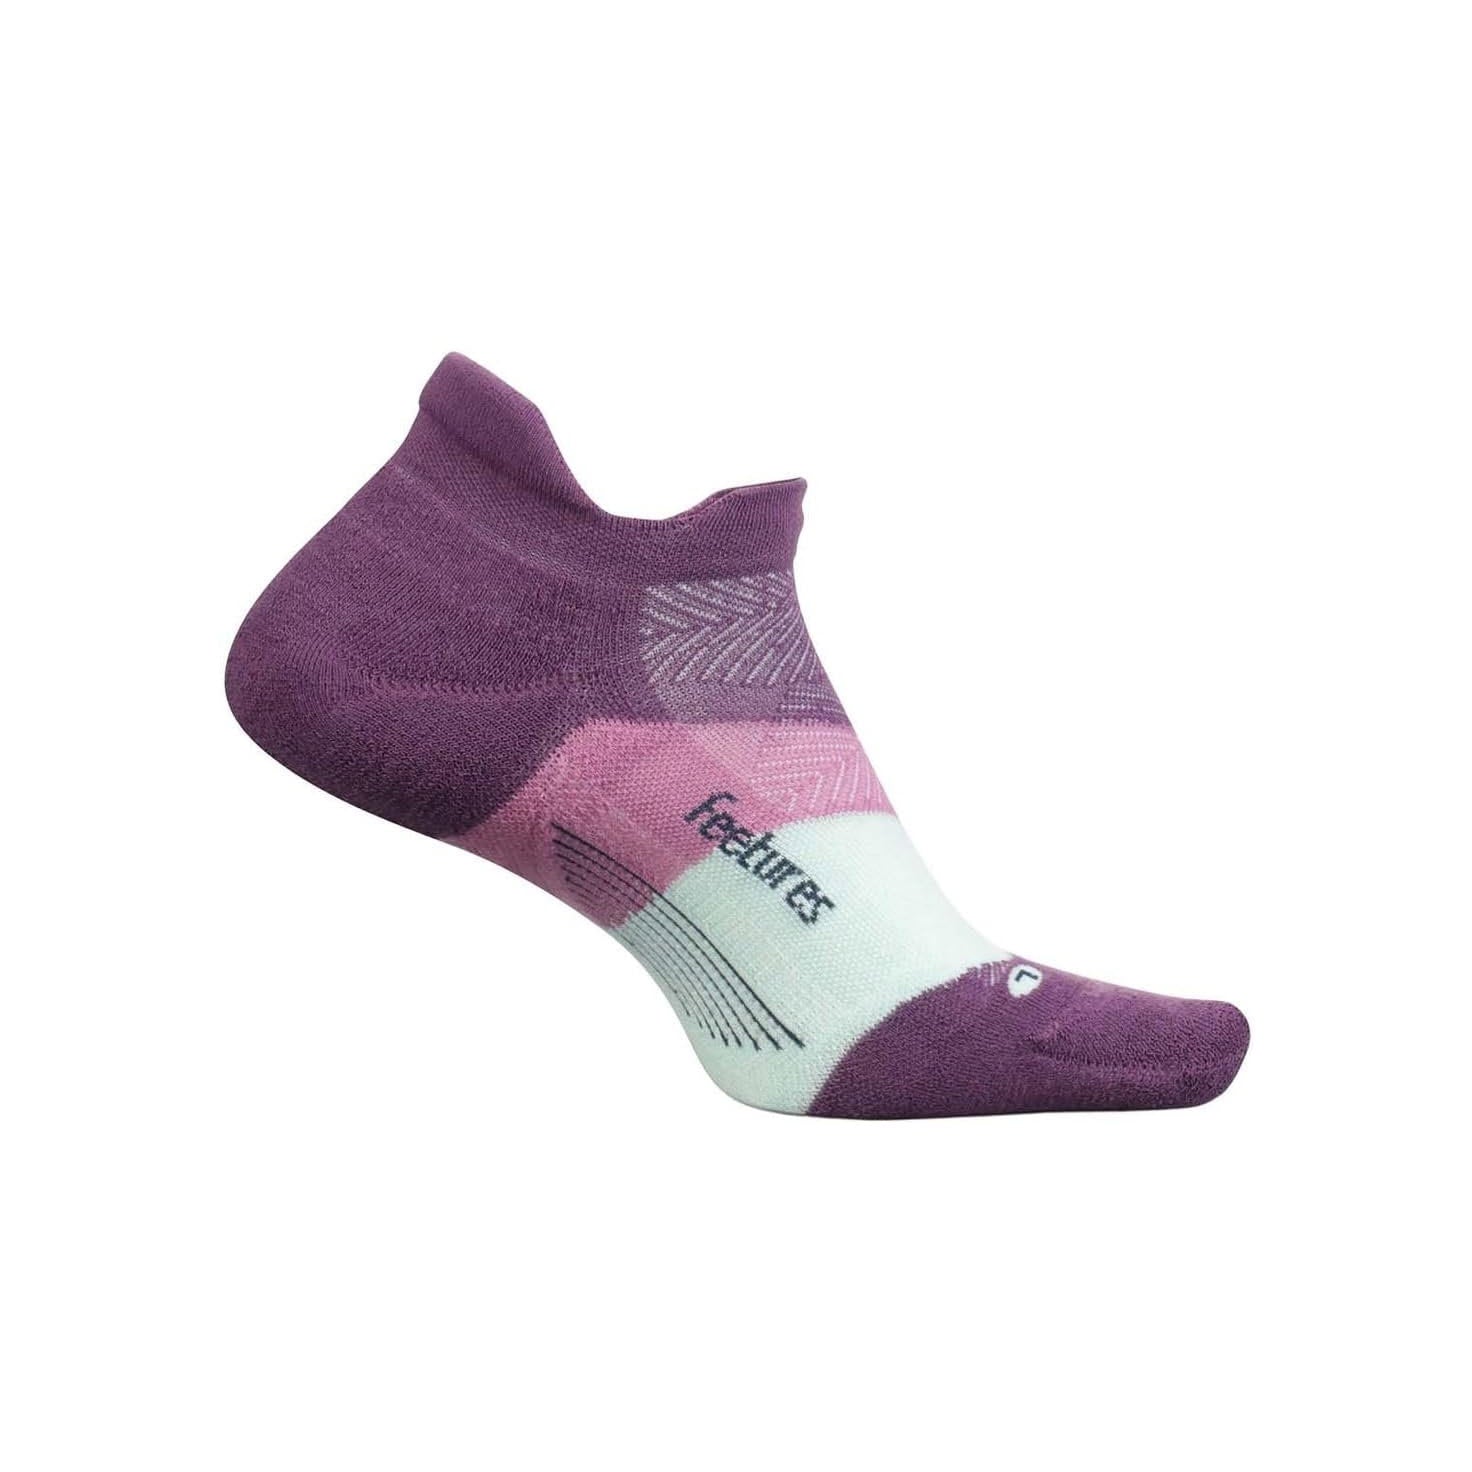 A single purple and white ELITE MAX CUSHION NO SHOW TAB PEAK PURPL sock with the Feetures brand displayed across the toe area, isolated on a white background.